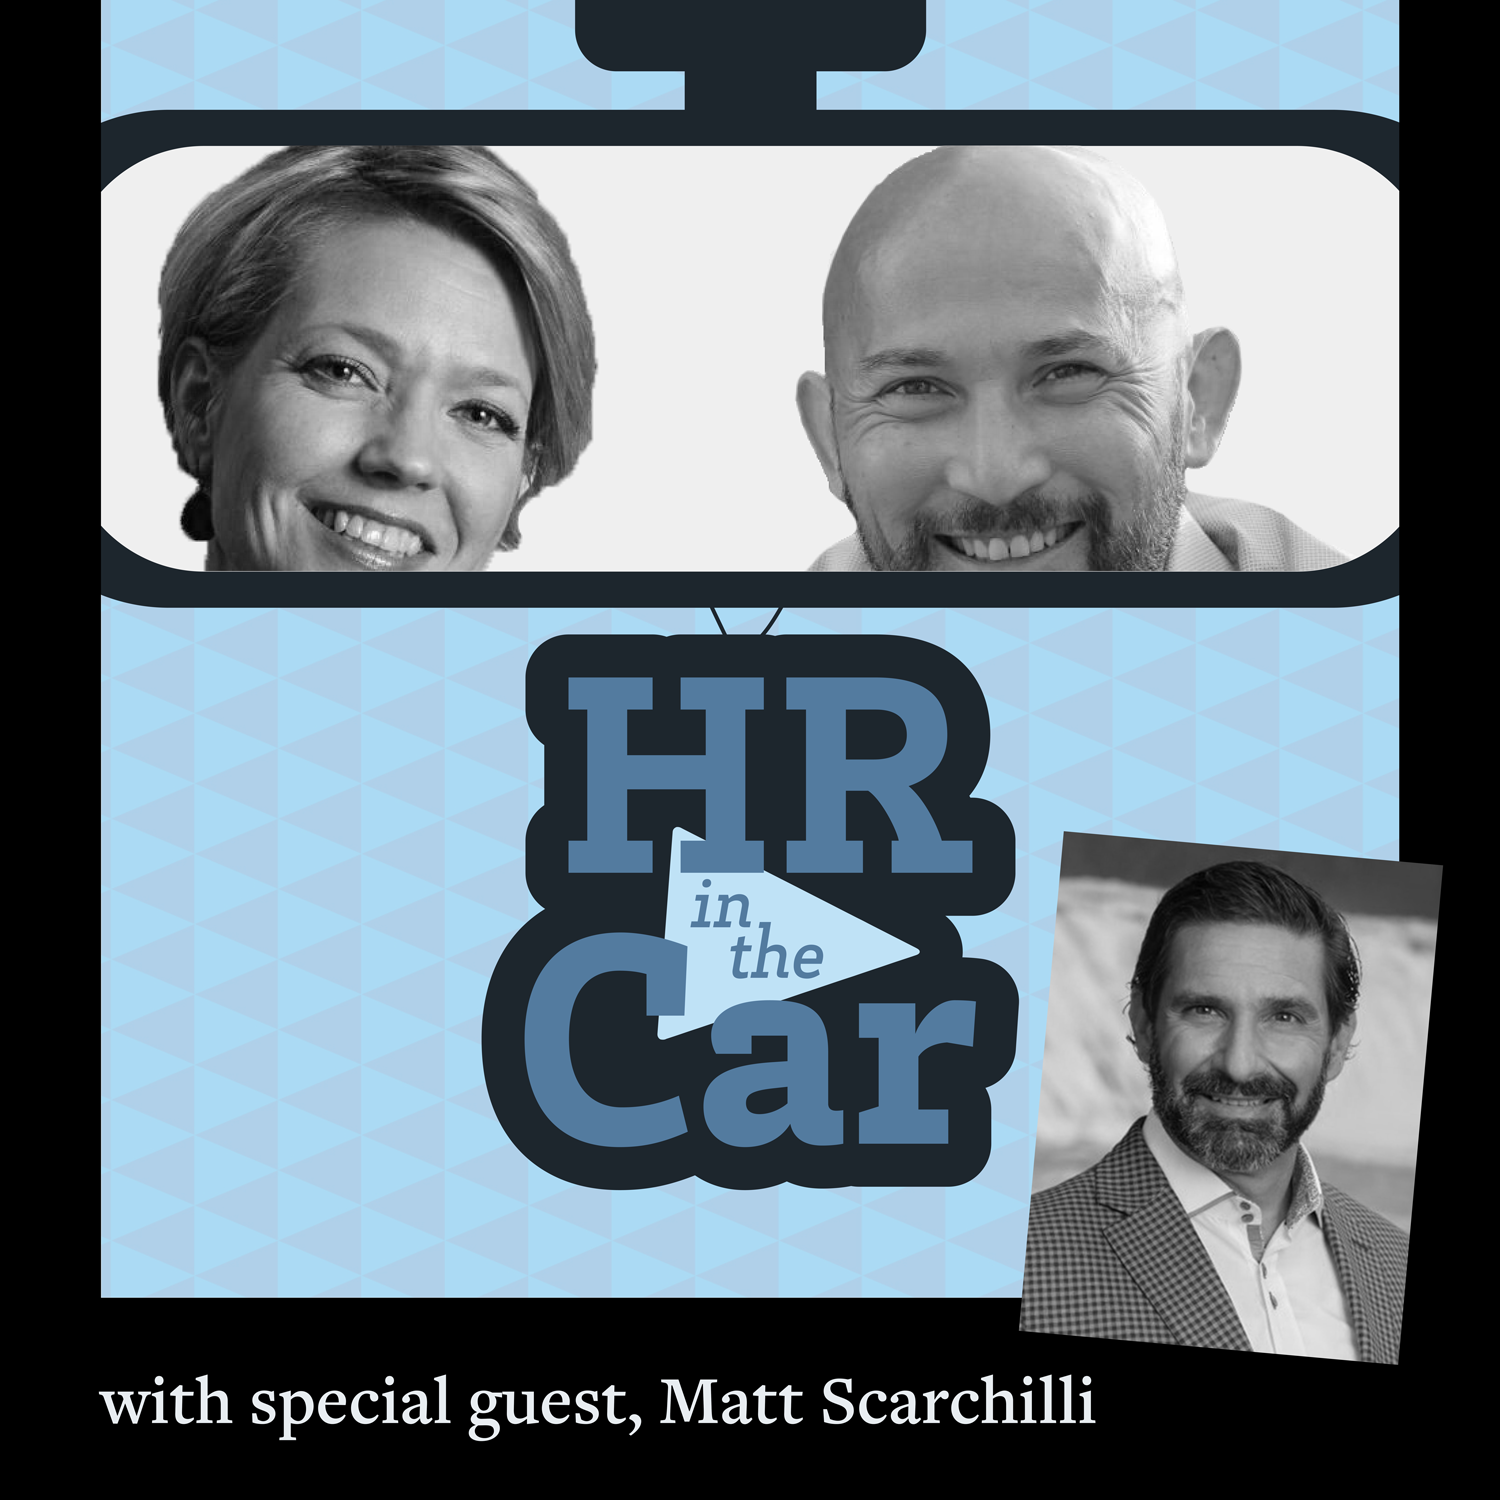 HR in the Car - Episode 23: "Lean On Your Network"